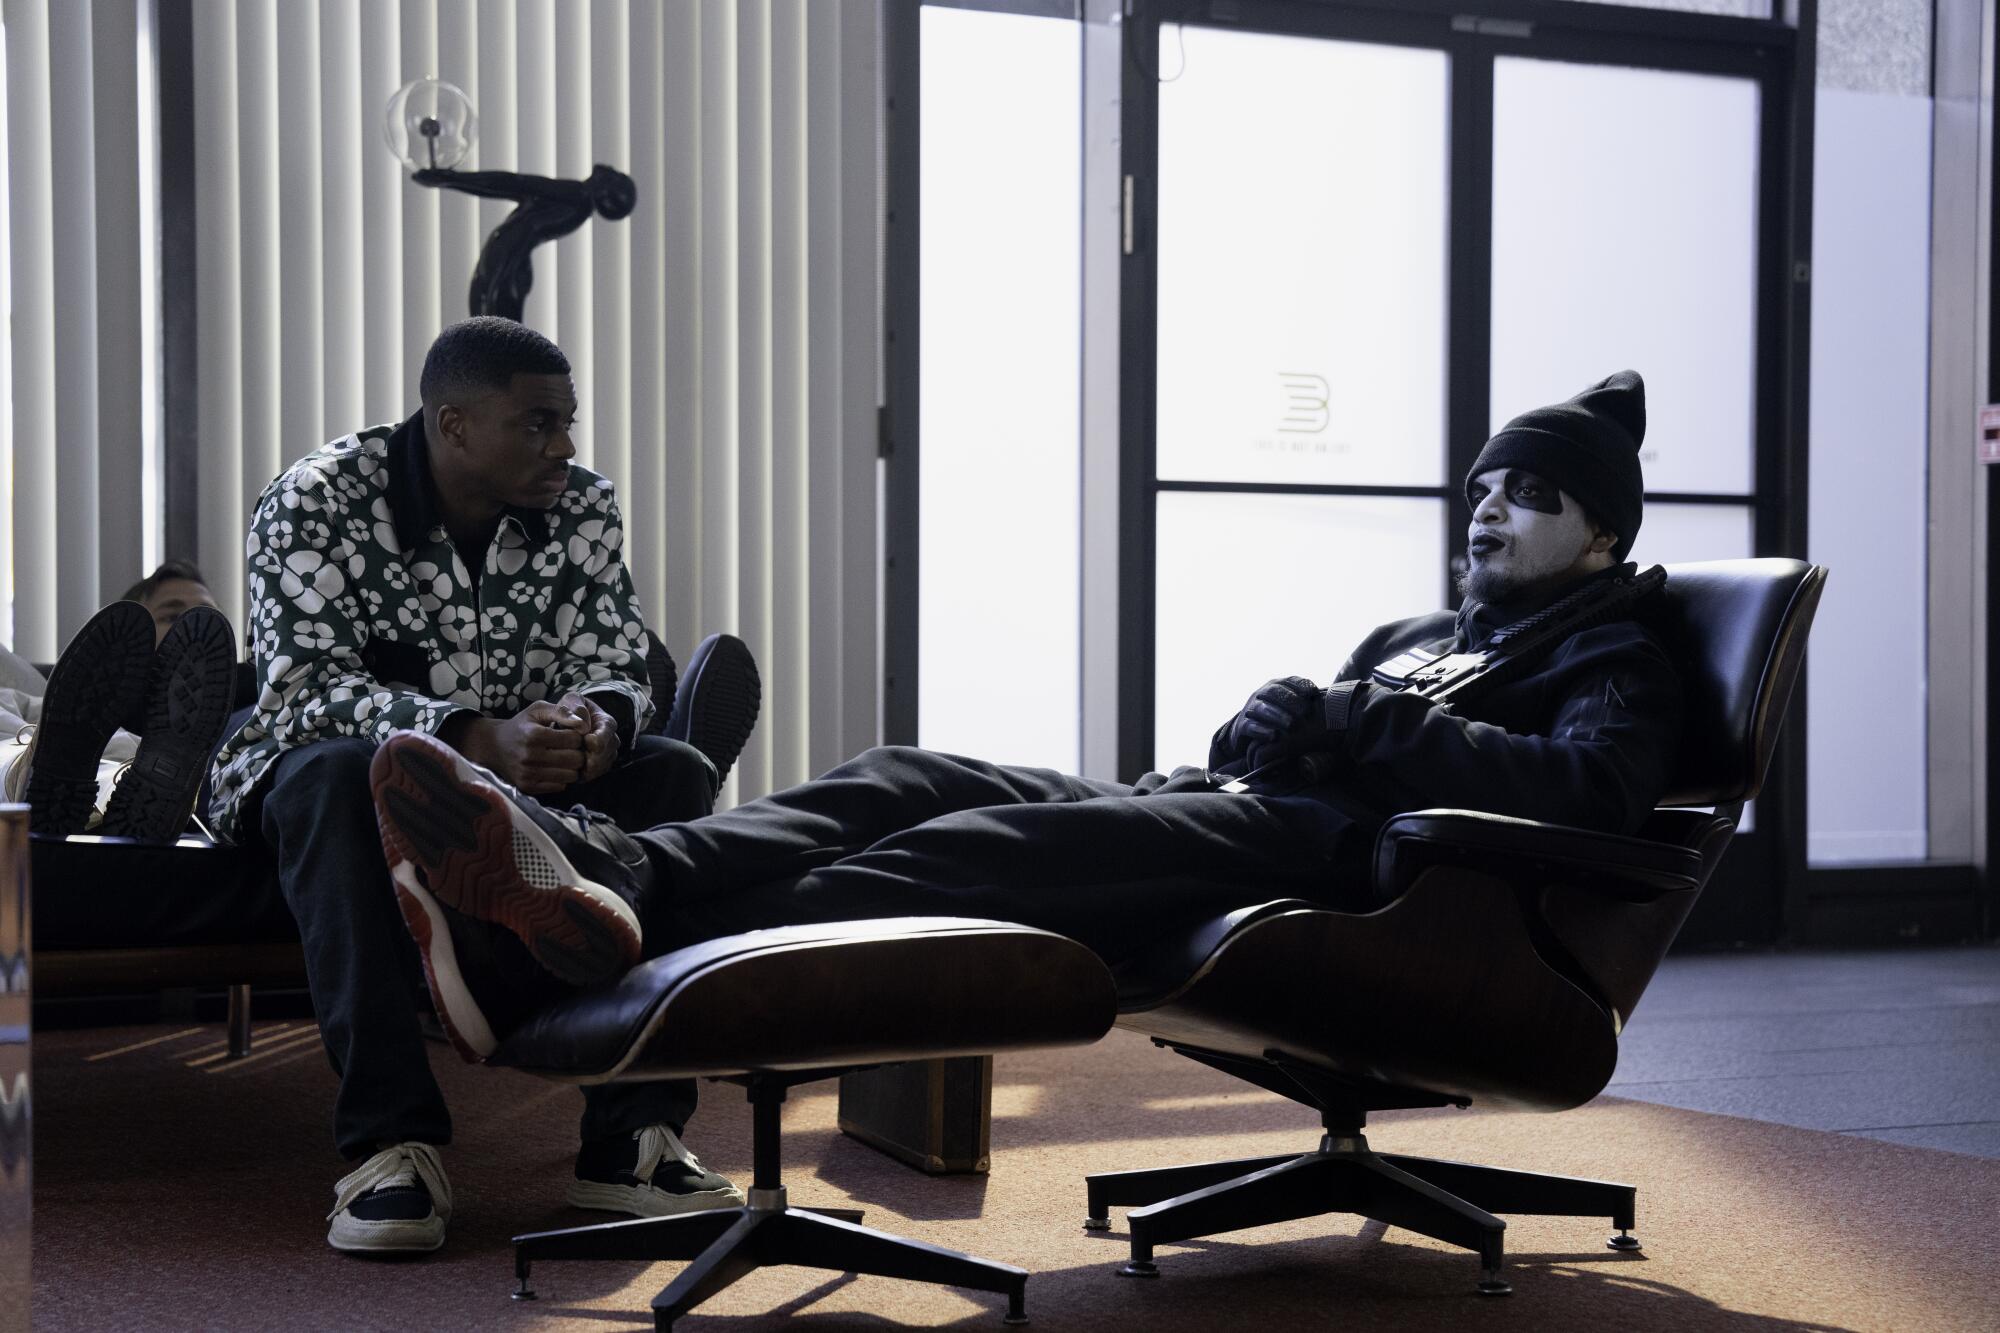 Vince Staples and Myles Bullock, who plays a bank robber, in a scene from "The Vince Staples Show."